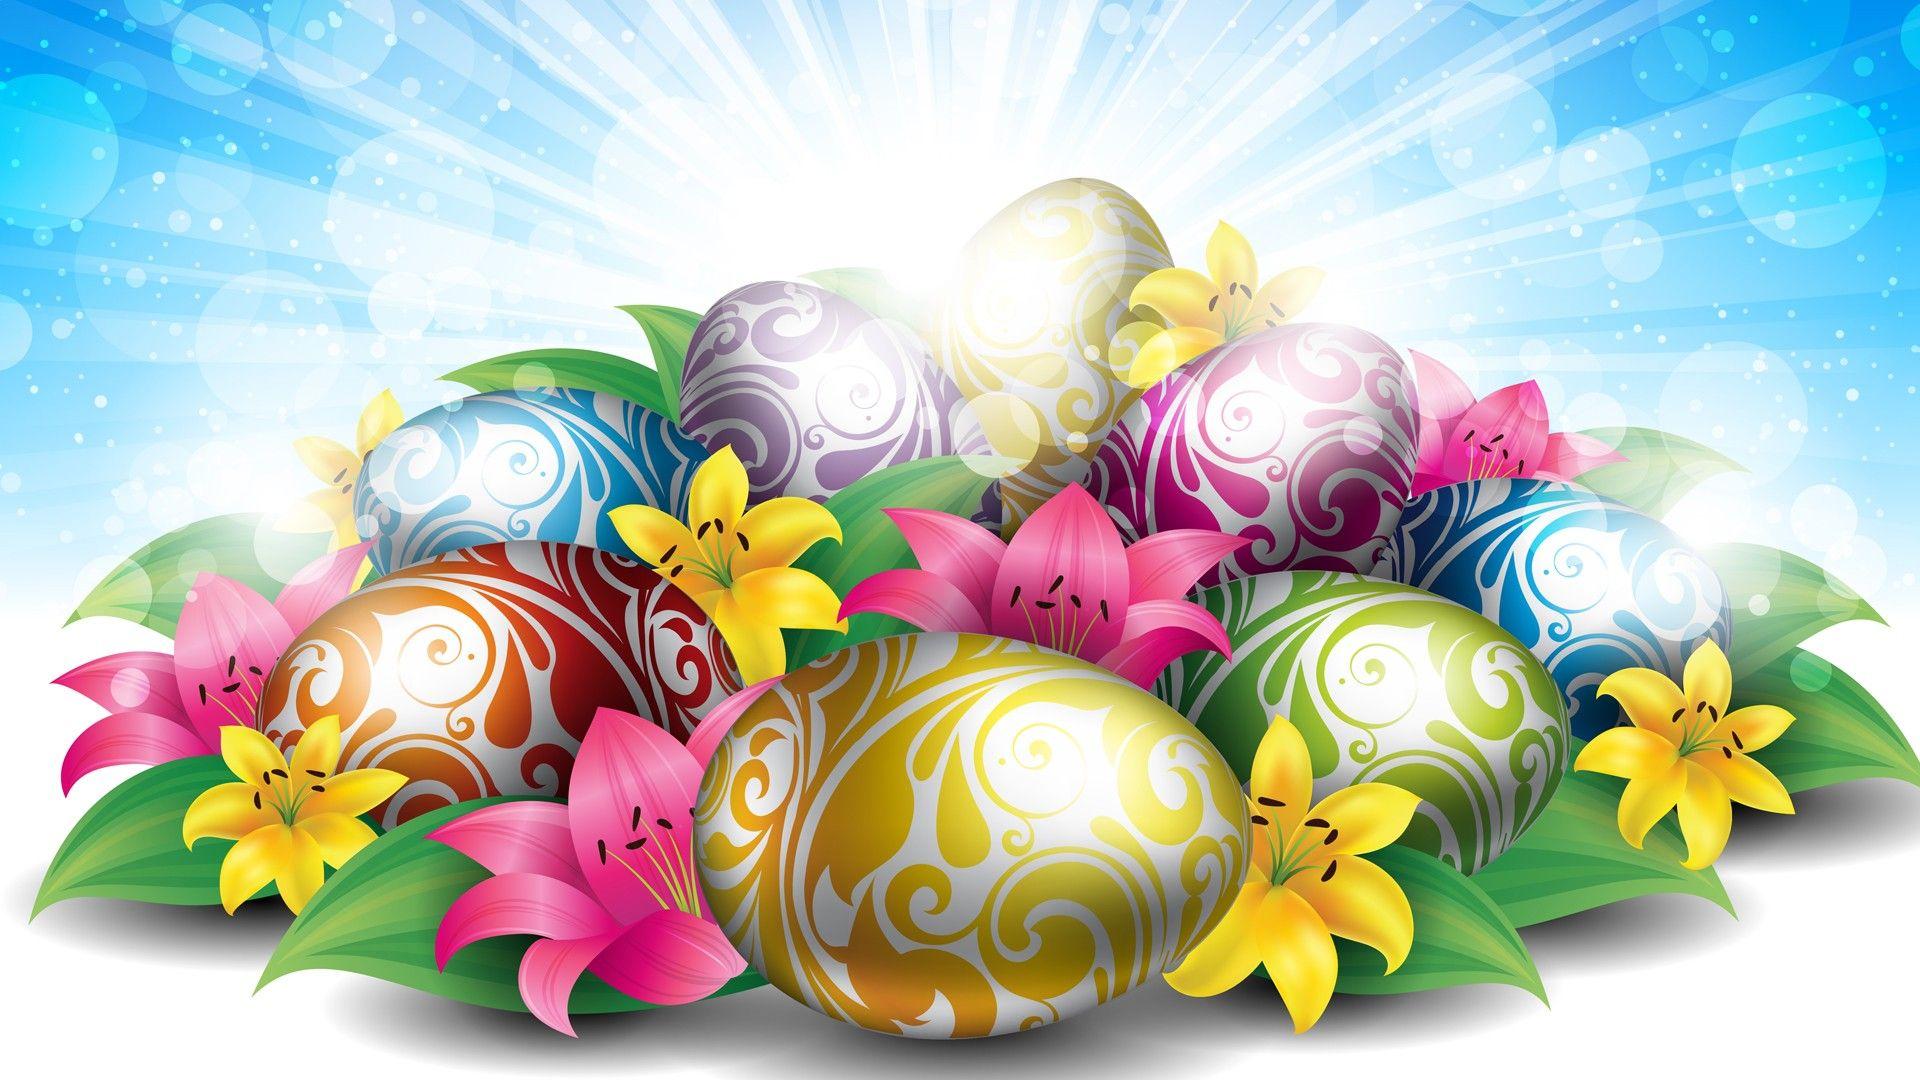 Abstract Easter Wallpaper image picture. Free Download